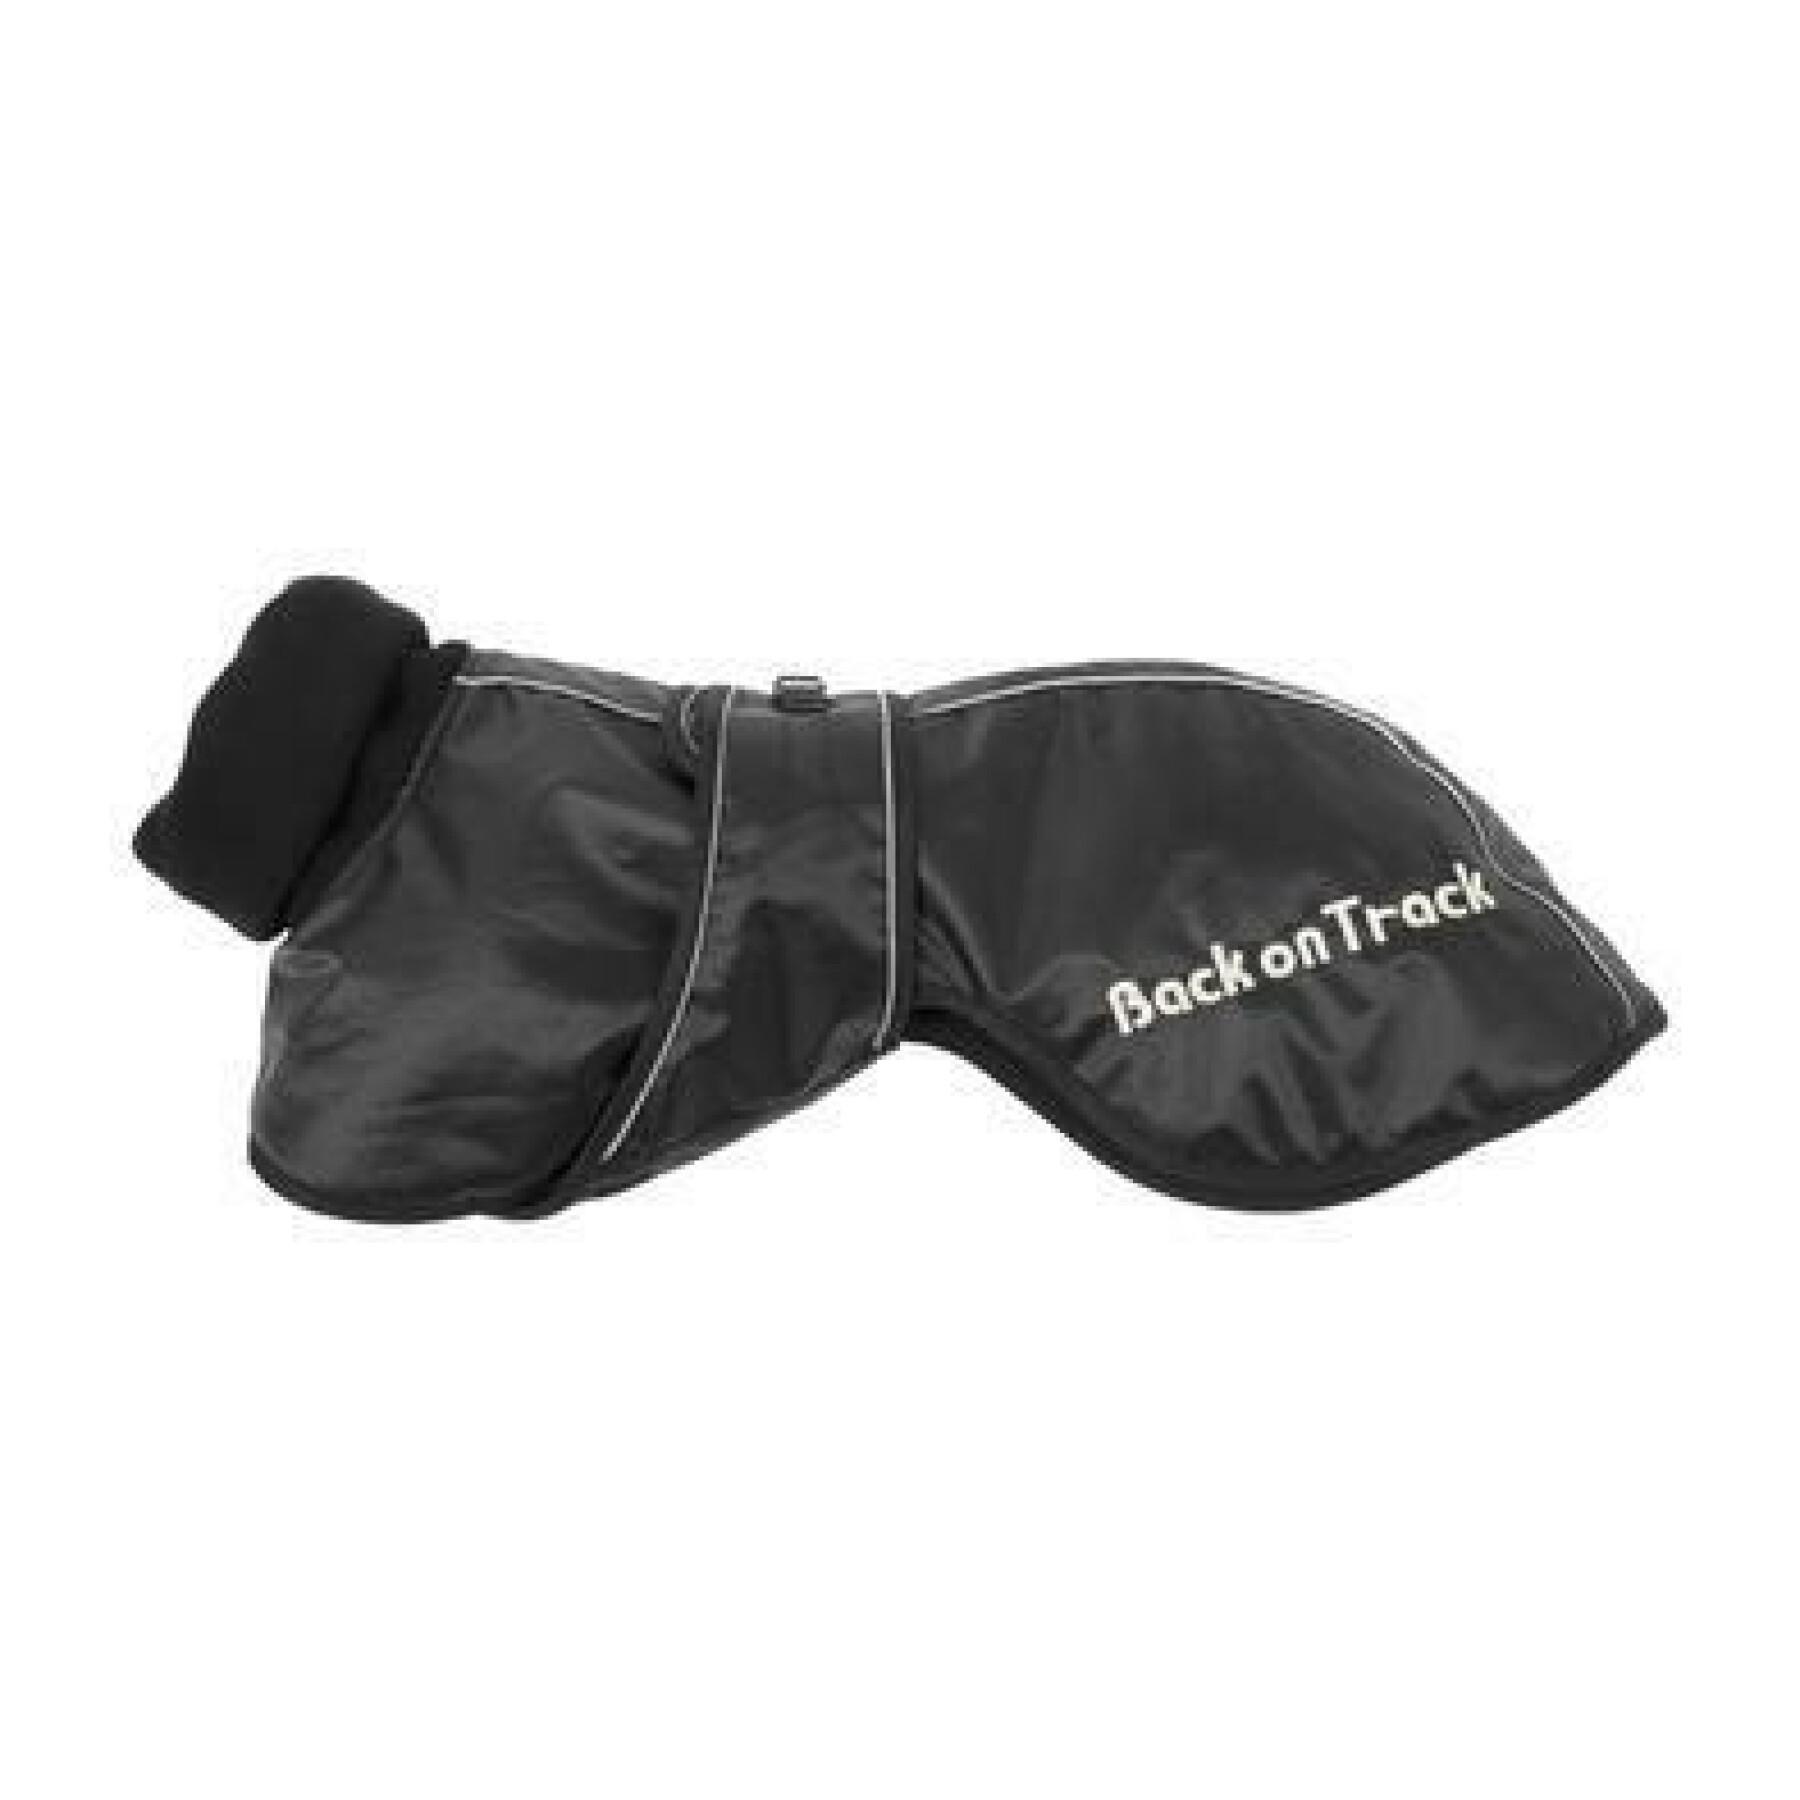 Cappottino per cani Back on Track whippet 45 cm